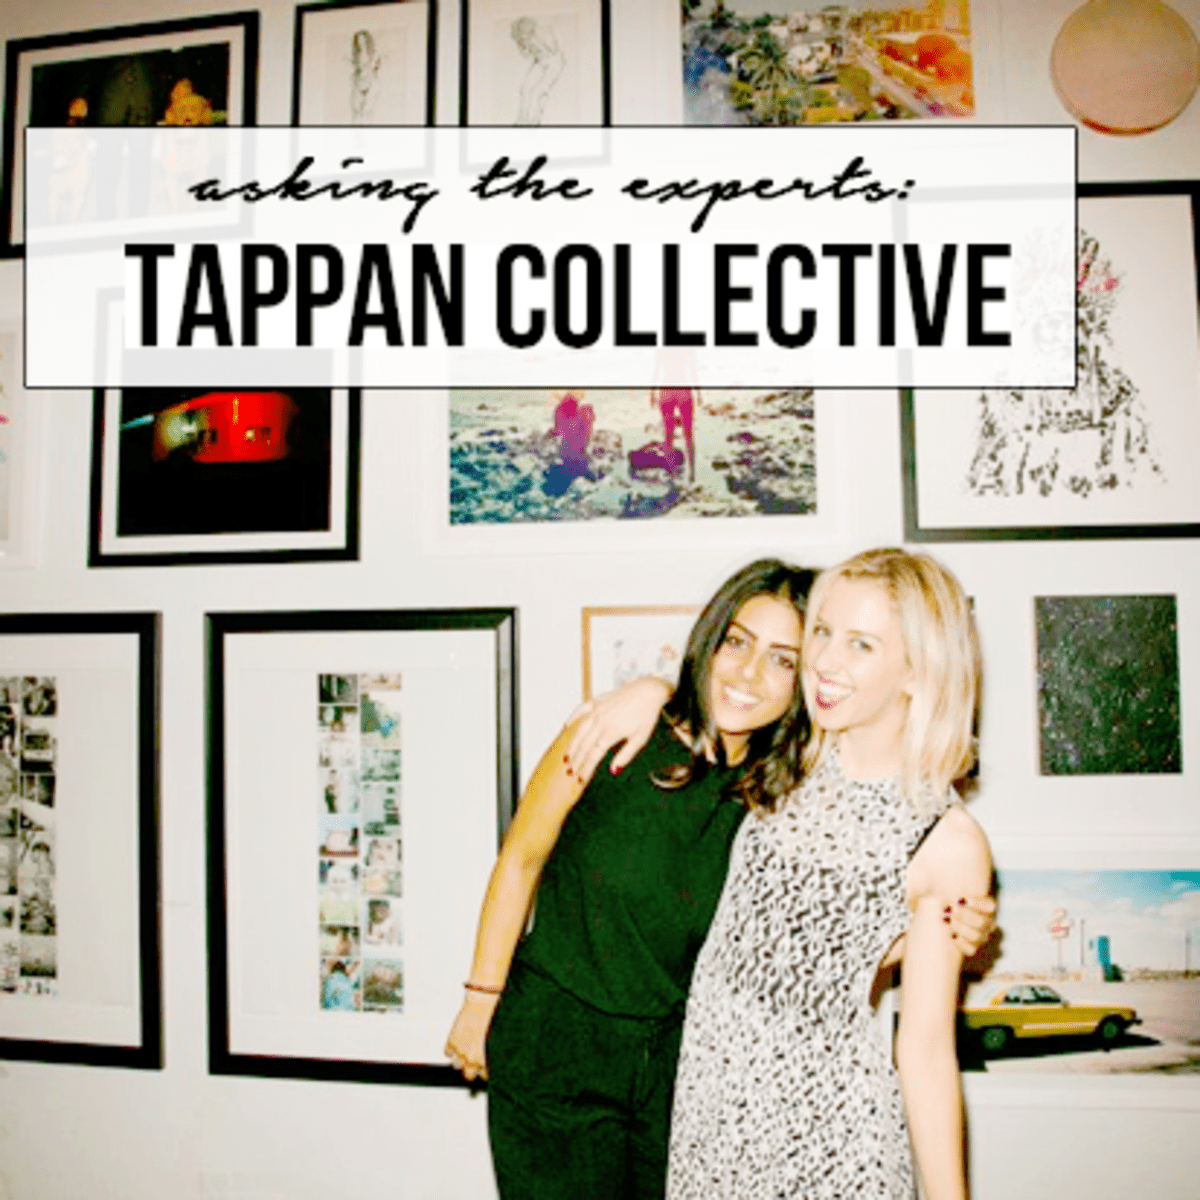 The Tappan Collective x Nordstrom Pop-Up Is All About Making Fine Art  Accessible